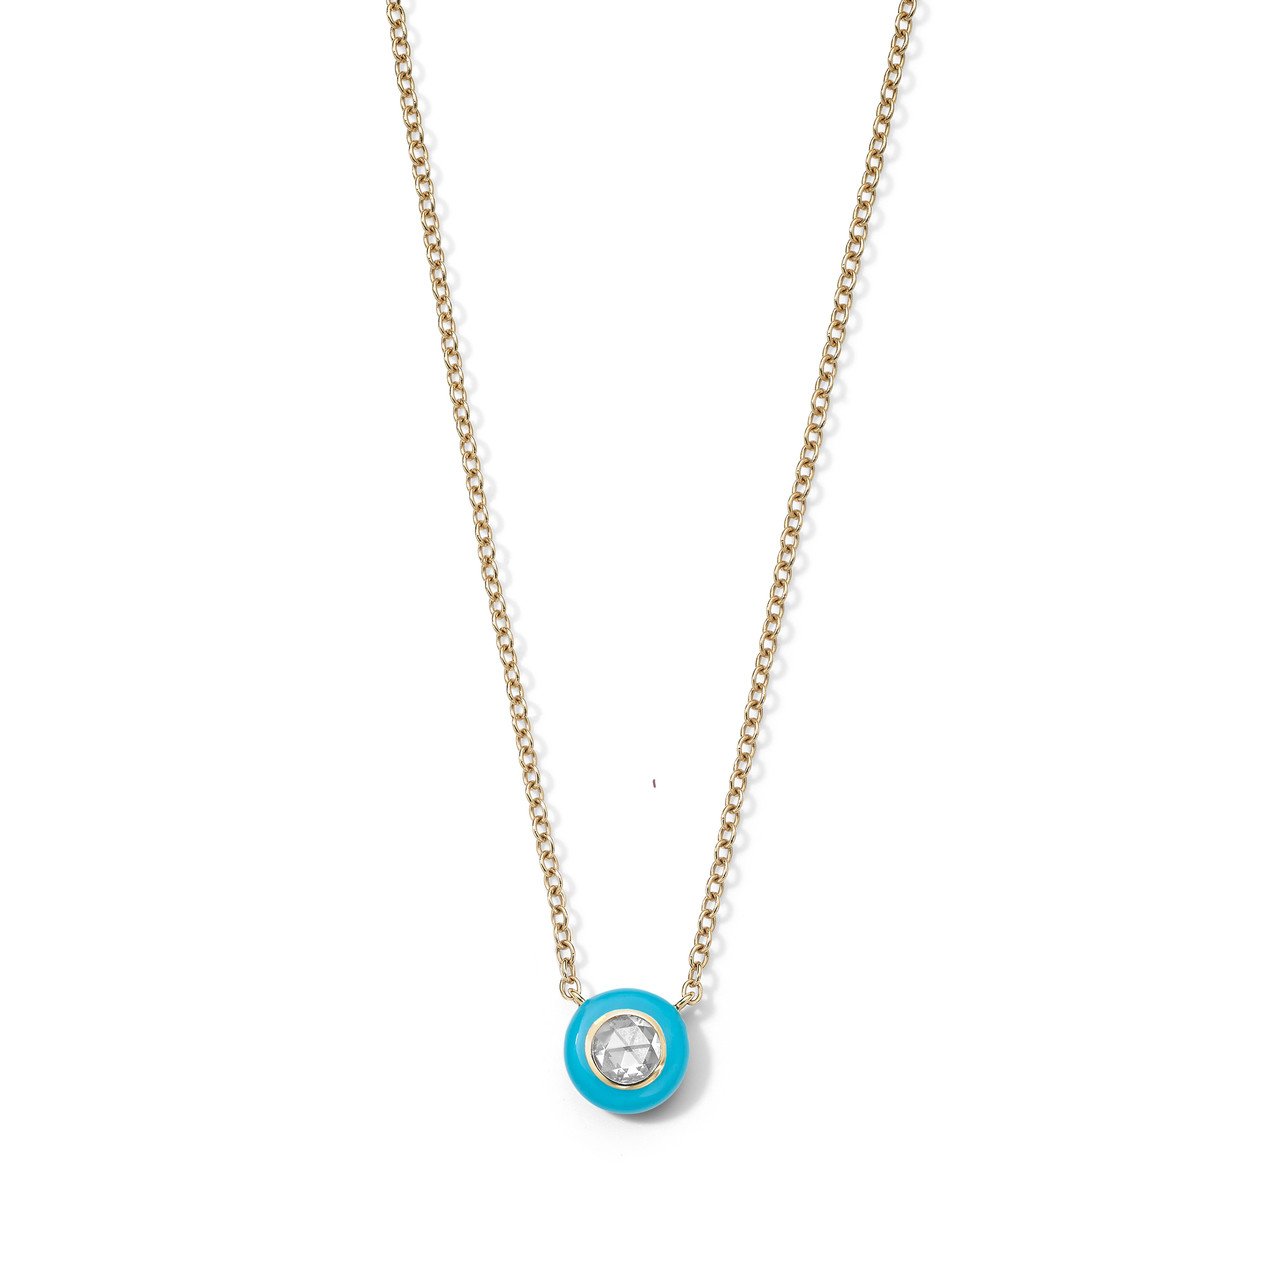 Ippolita “Stardust” solitaire necklace in18k gold with diamond, $2,696 at Ippolita 